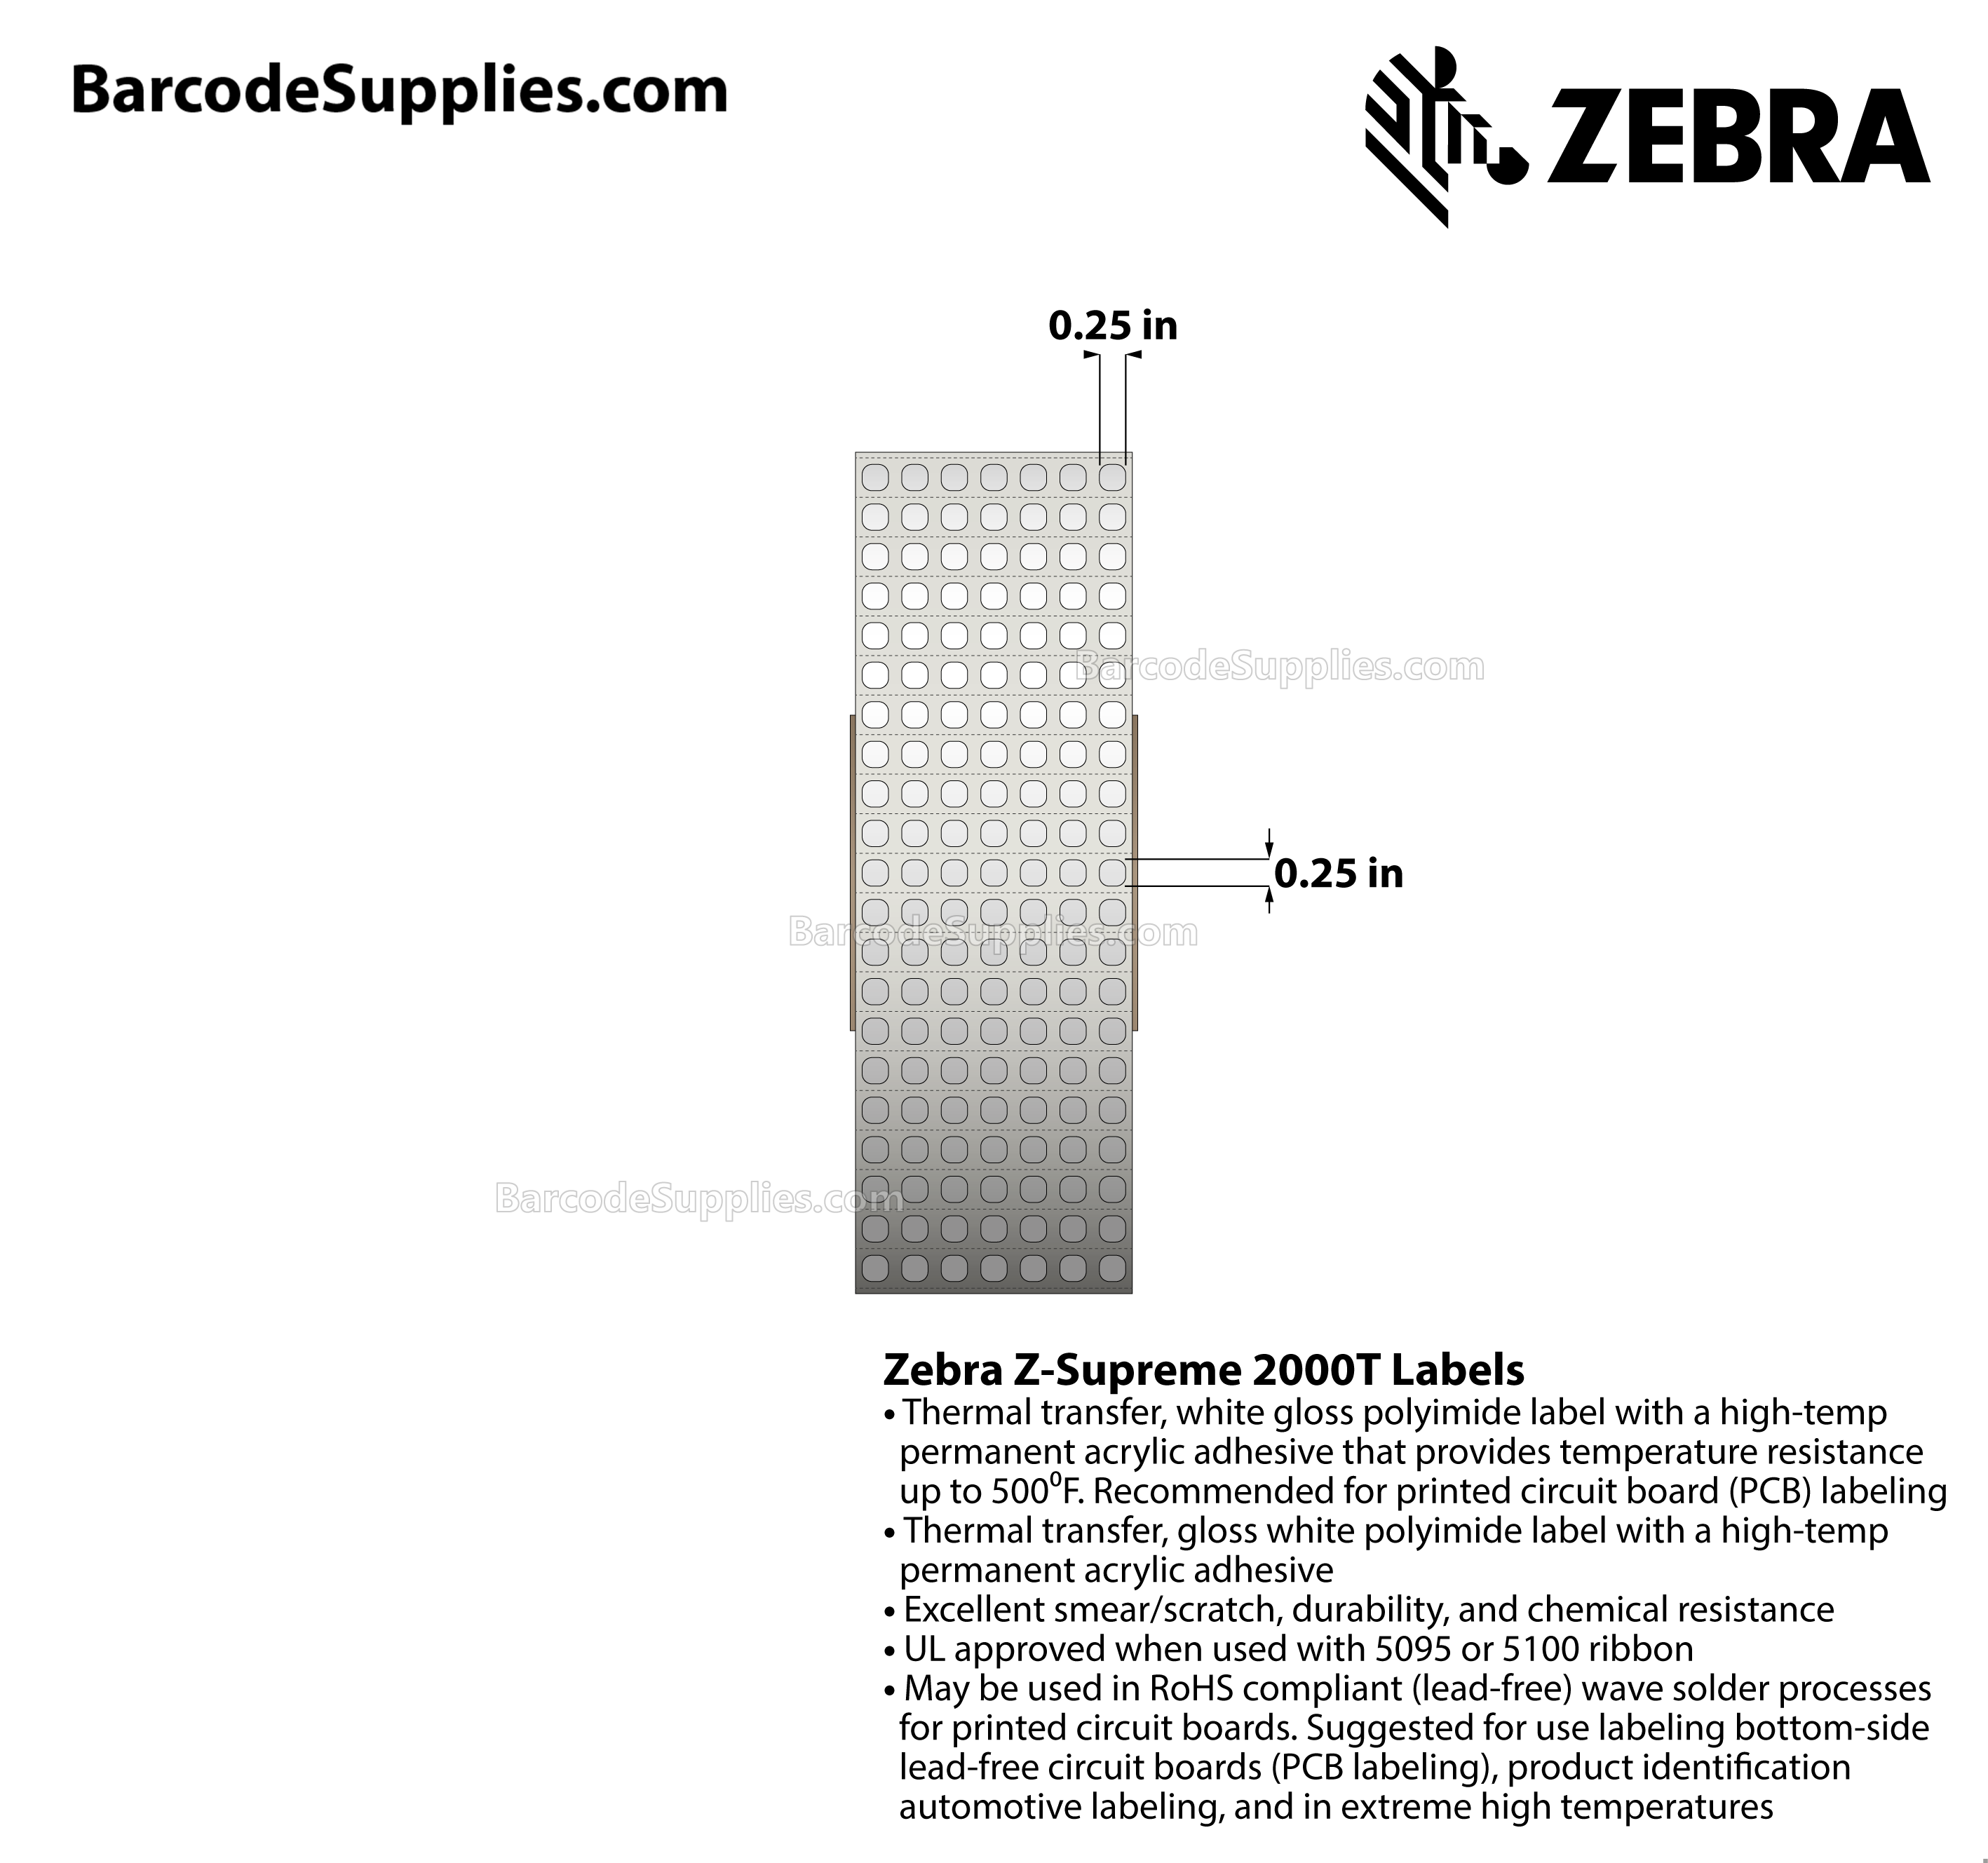 0.25 x 0.25 Thermal Transfer White Z-Supreme 2000T White (7-Across) Labels With High-temp Adhesive - Perforated - 10003 Labels Per Roll - Carton Of 1 Rolls - 10003 Labels Total - MPN: 10015787